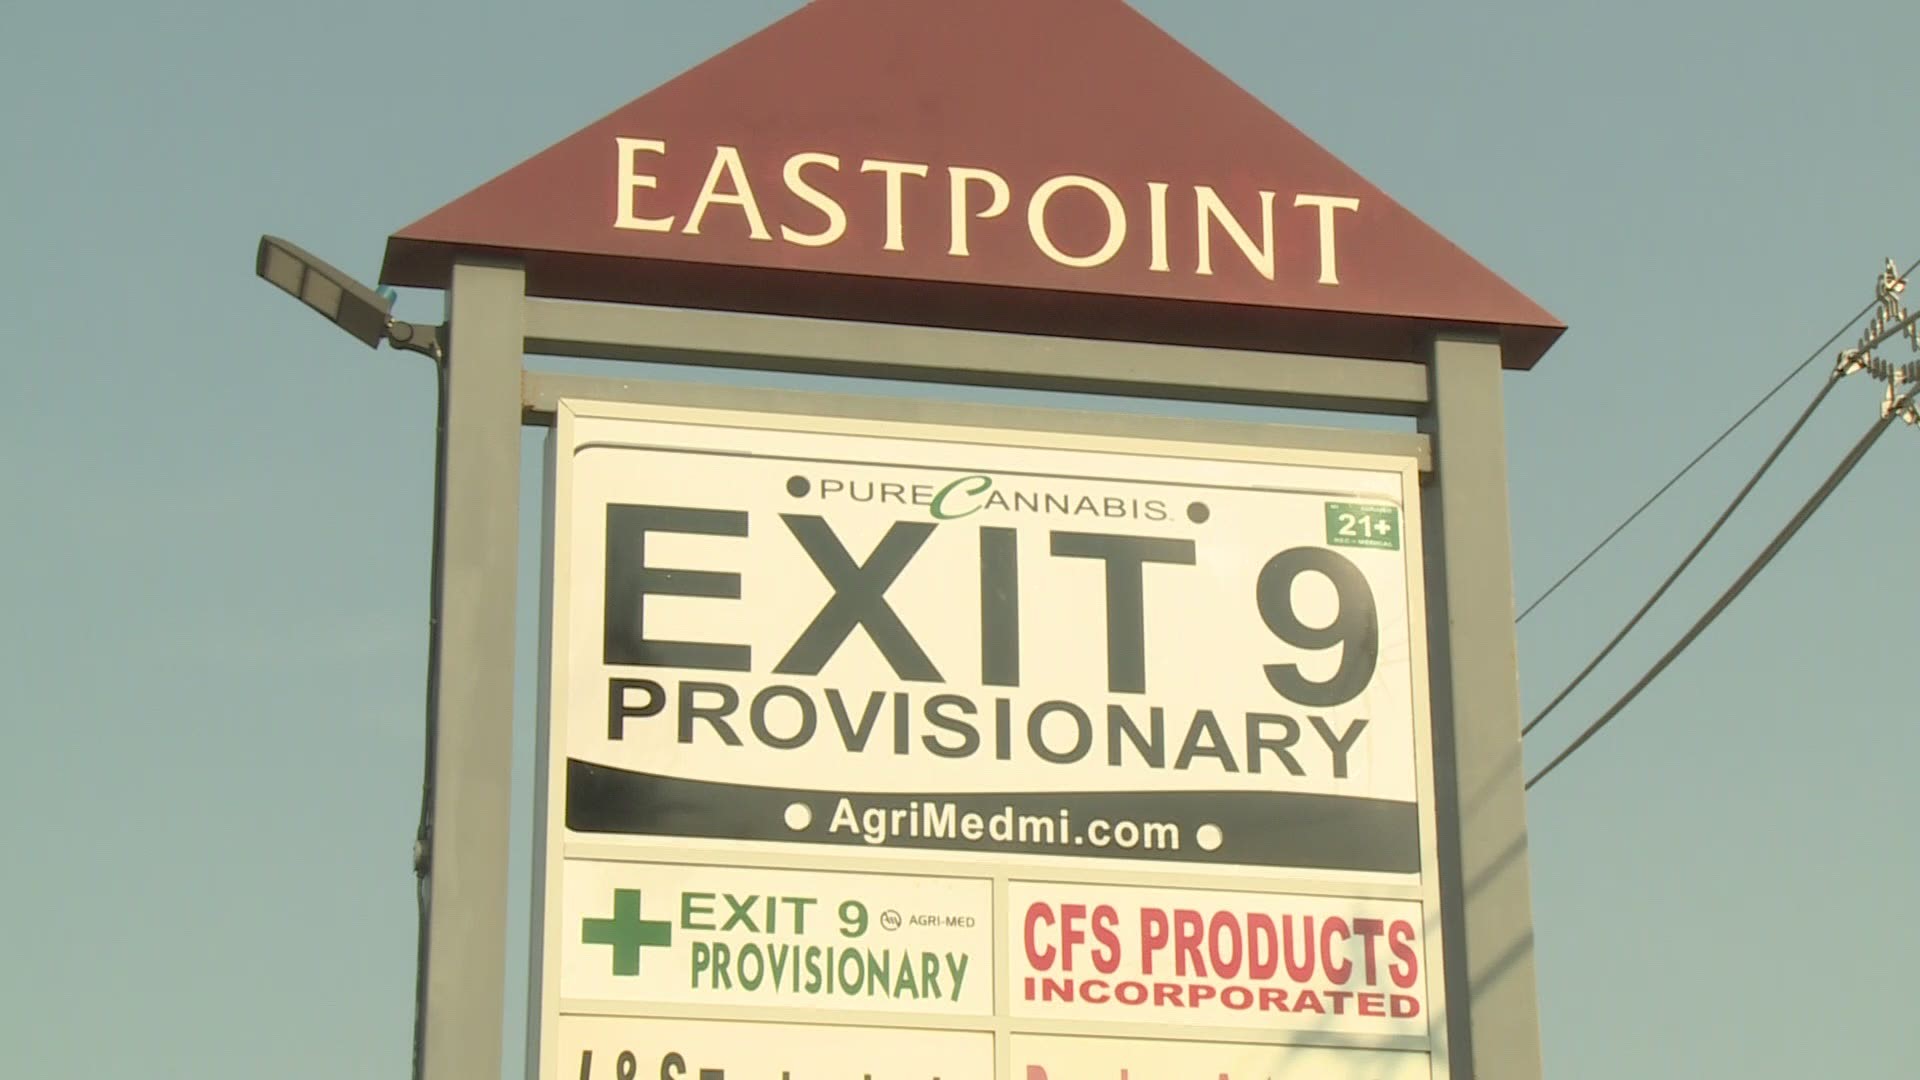 Exit 9 Provisionary is the first recreational marijuana store in Ottawa County.